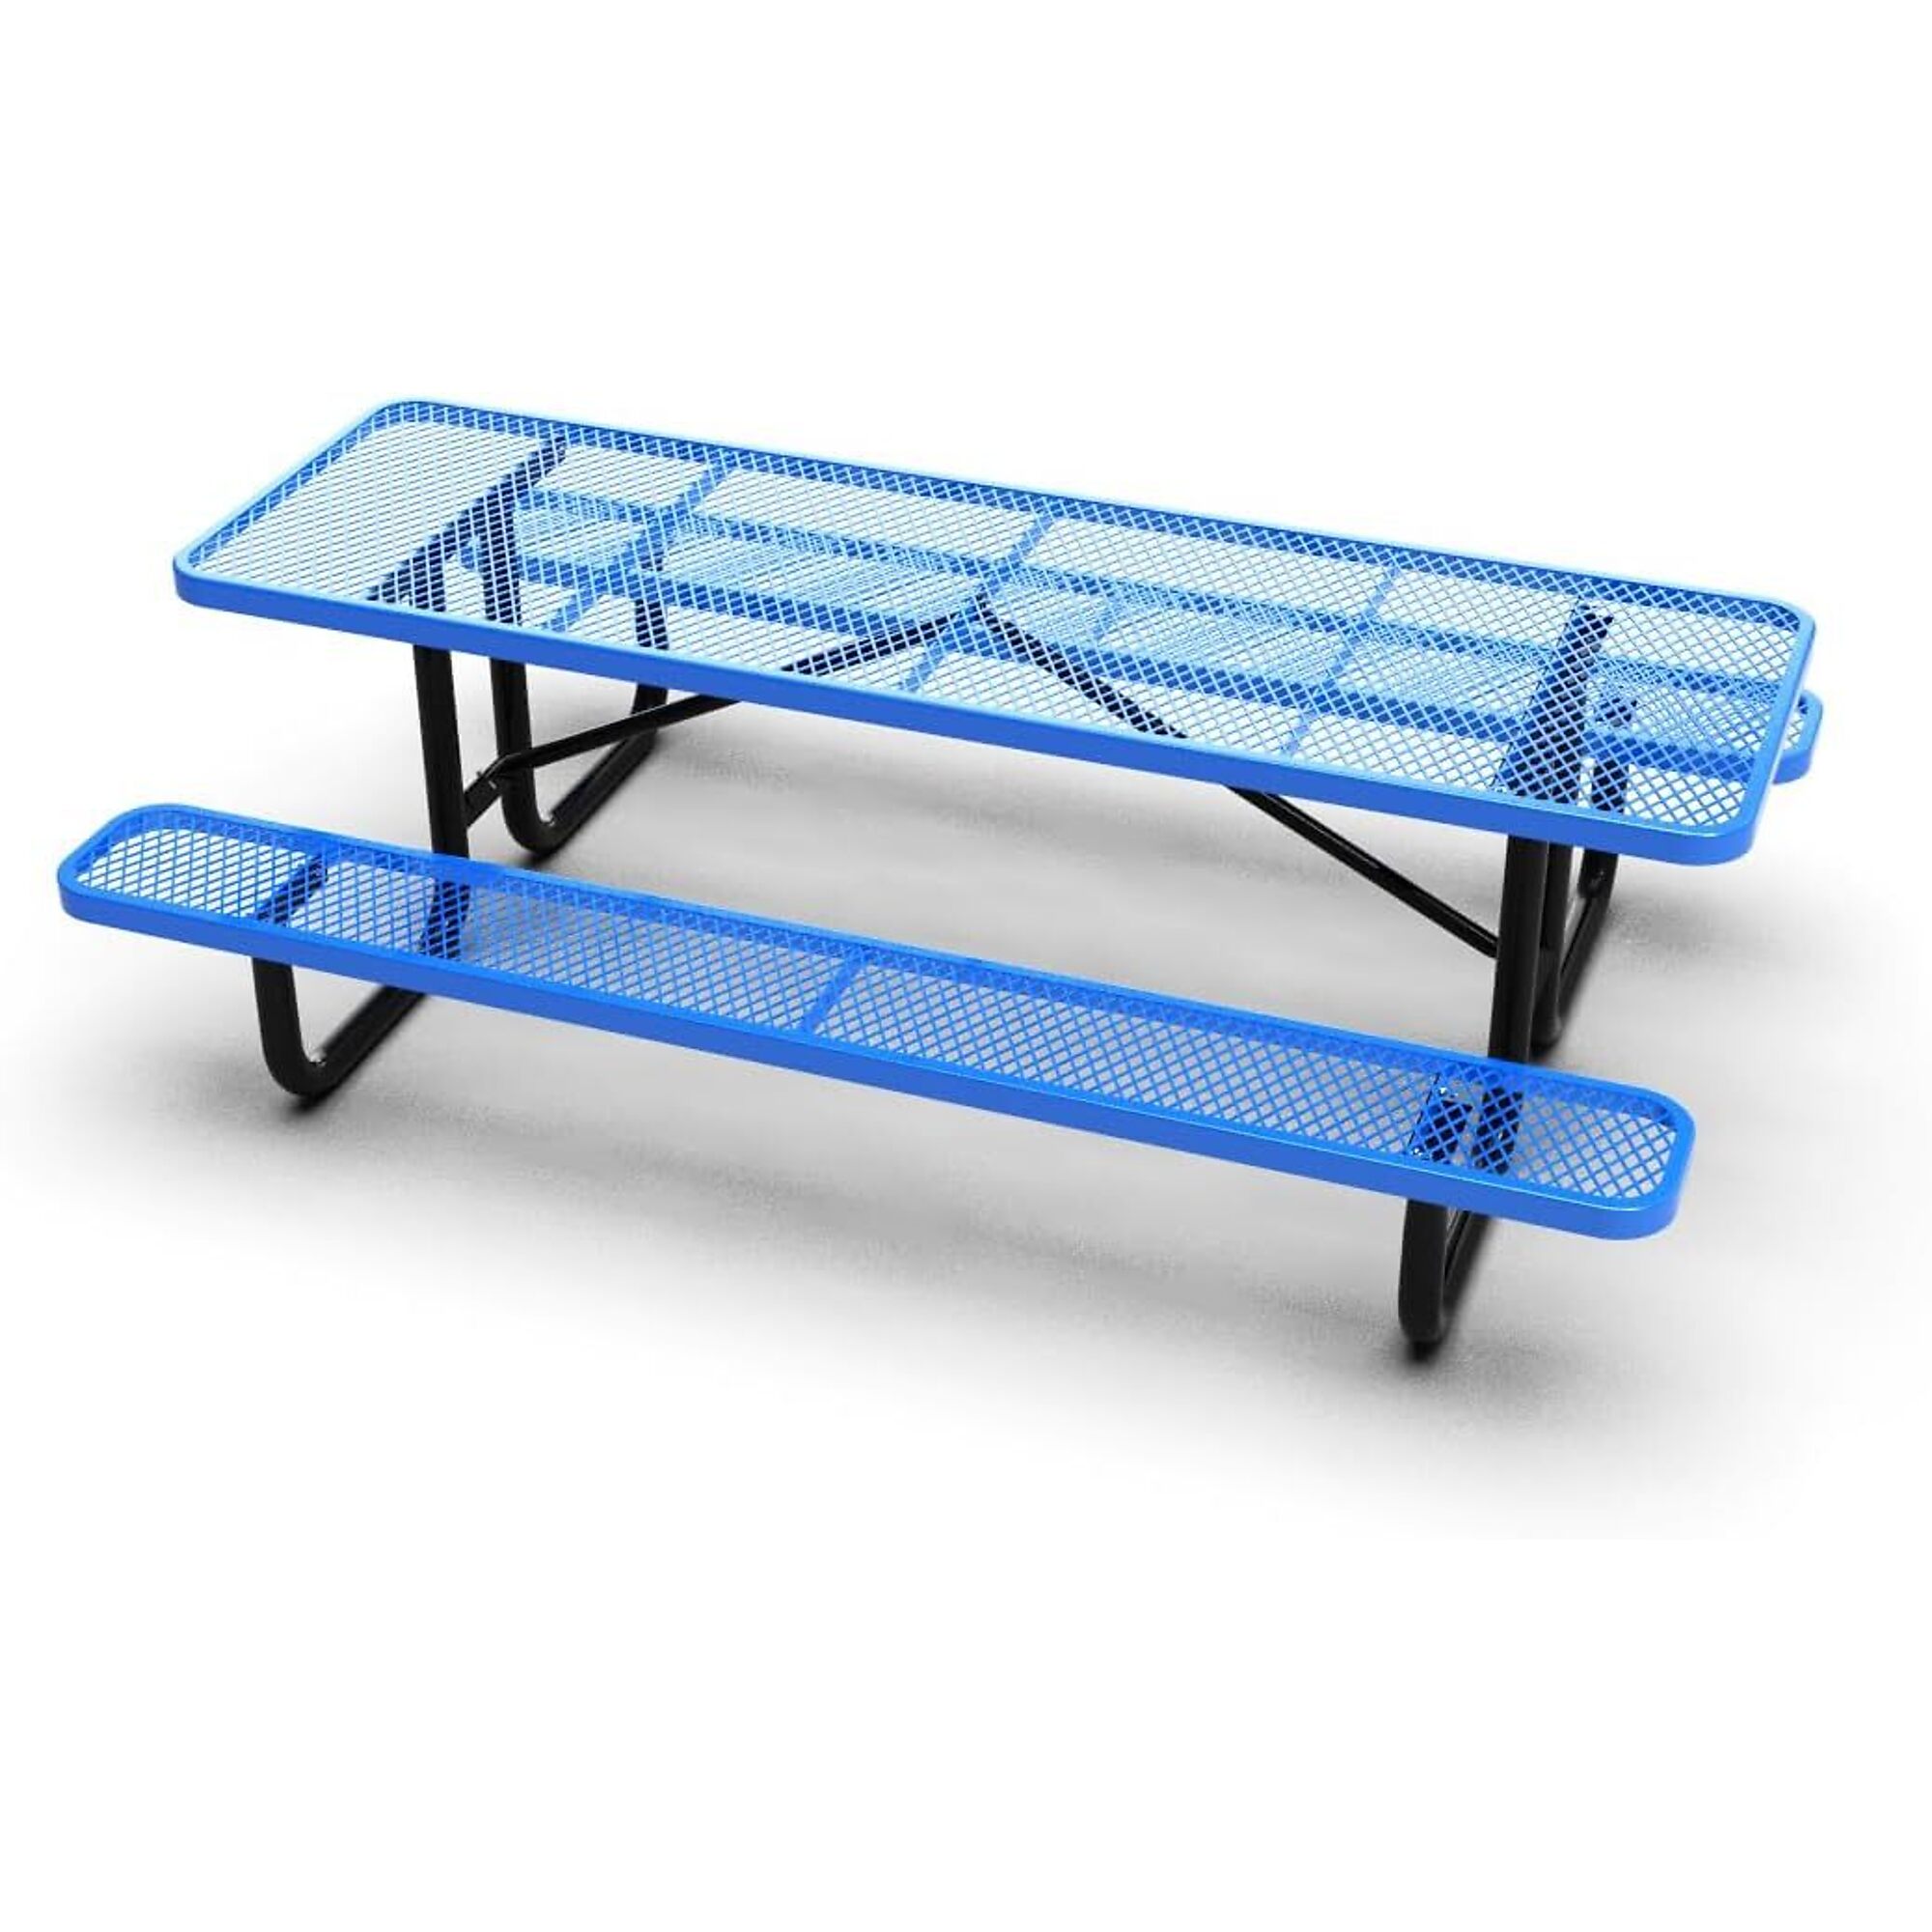 Park Elements, 8ft. thermoplastic coated commercial picnic table, Table Shape Rectangle, Primary Color Blue, Height 30 in, Model CD-96PT-BLU